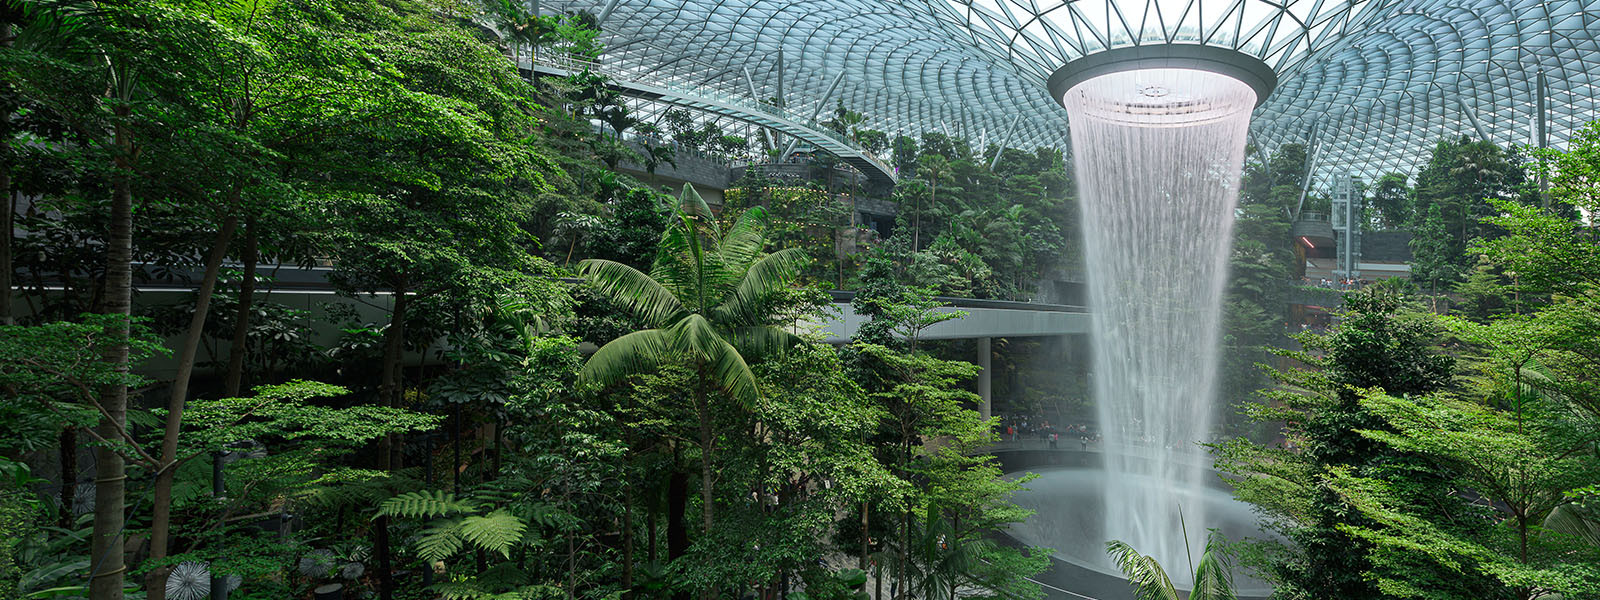  Jewel Changi Airport is a new terminal building under a glass dome, with indoor waterfall and tropical forest, shopping malls and dining, in Singapore,  Jewel Changi Airport is a new terminal building under a glass d